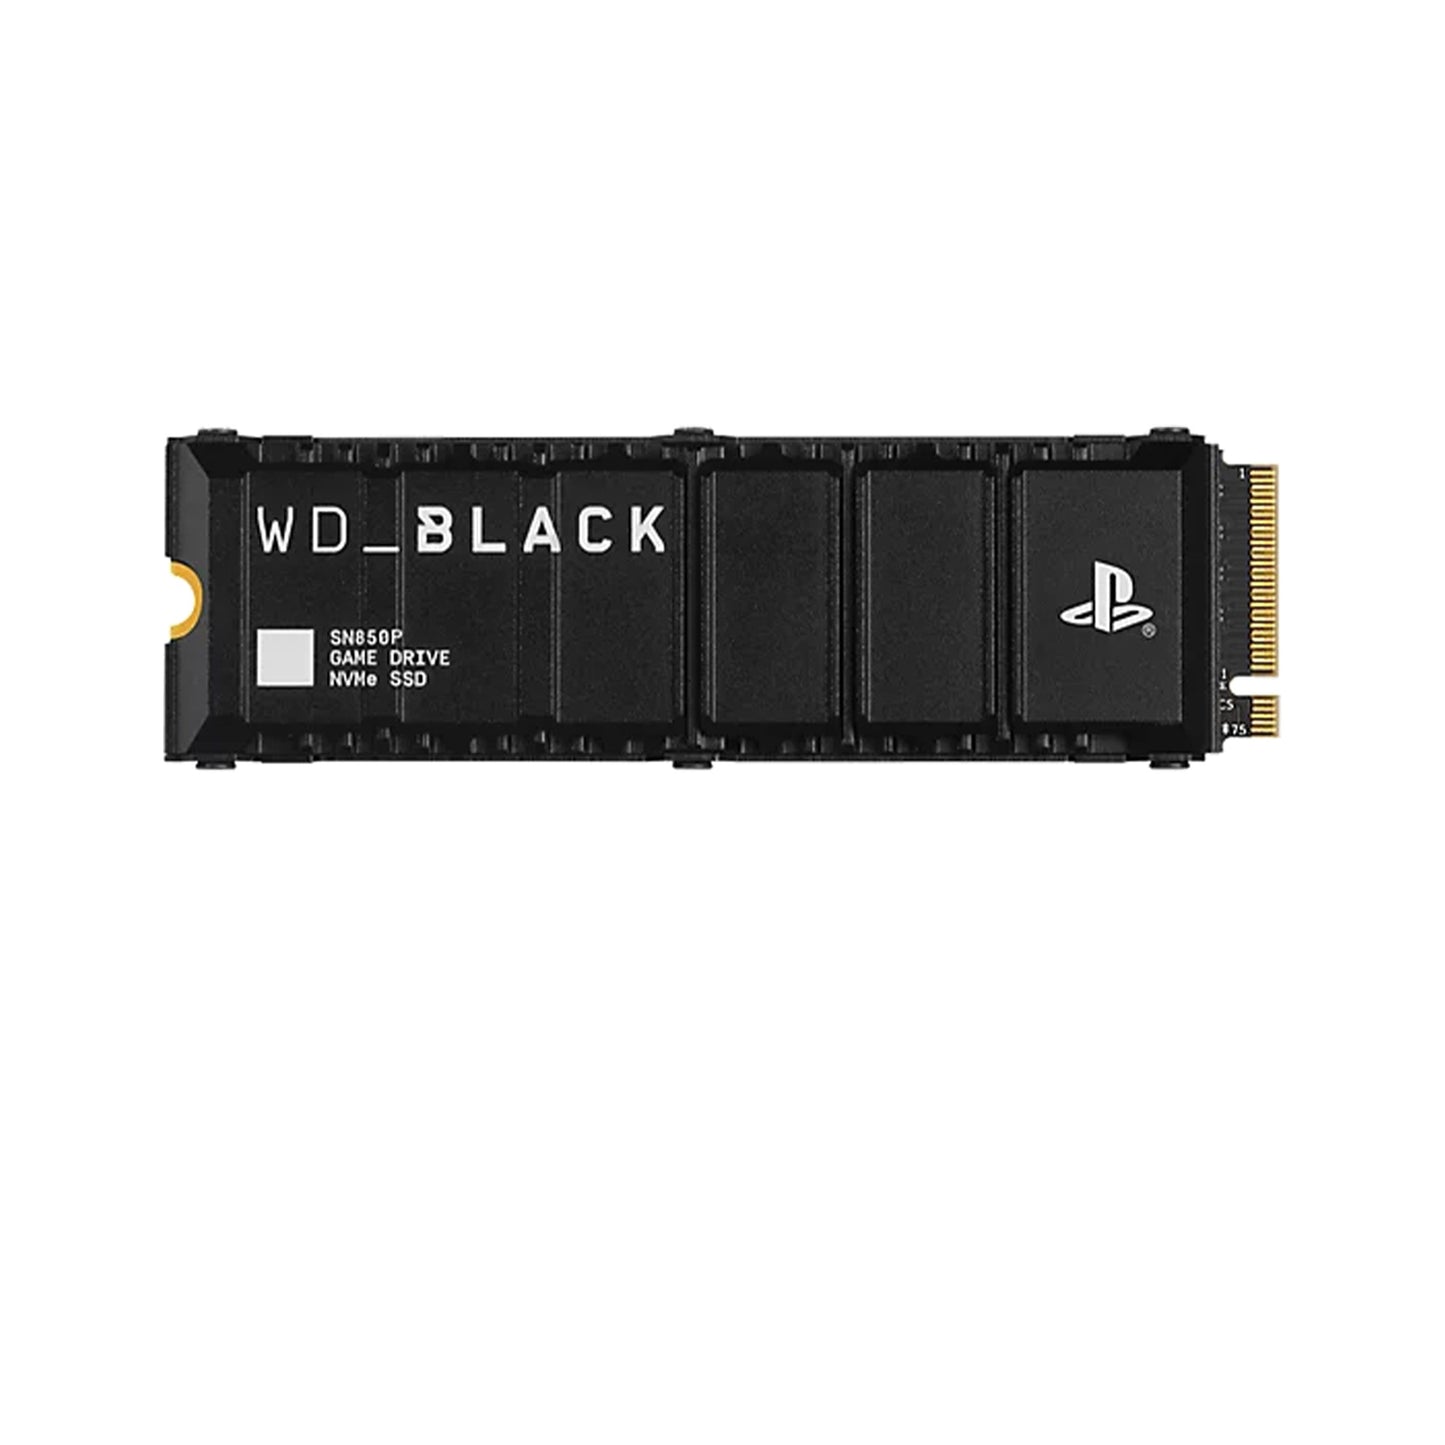 1TB WD BLACK™ SN850P NVMe™ SSD for PS5™ consoles